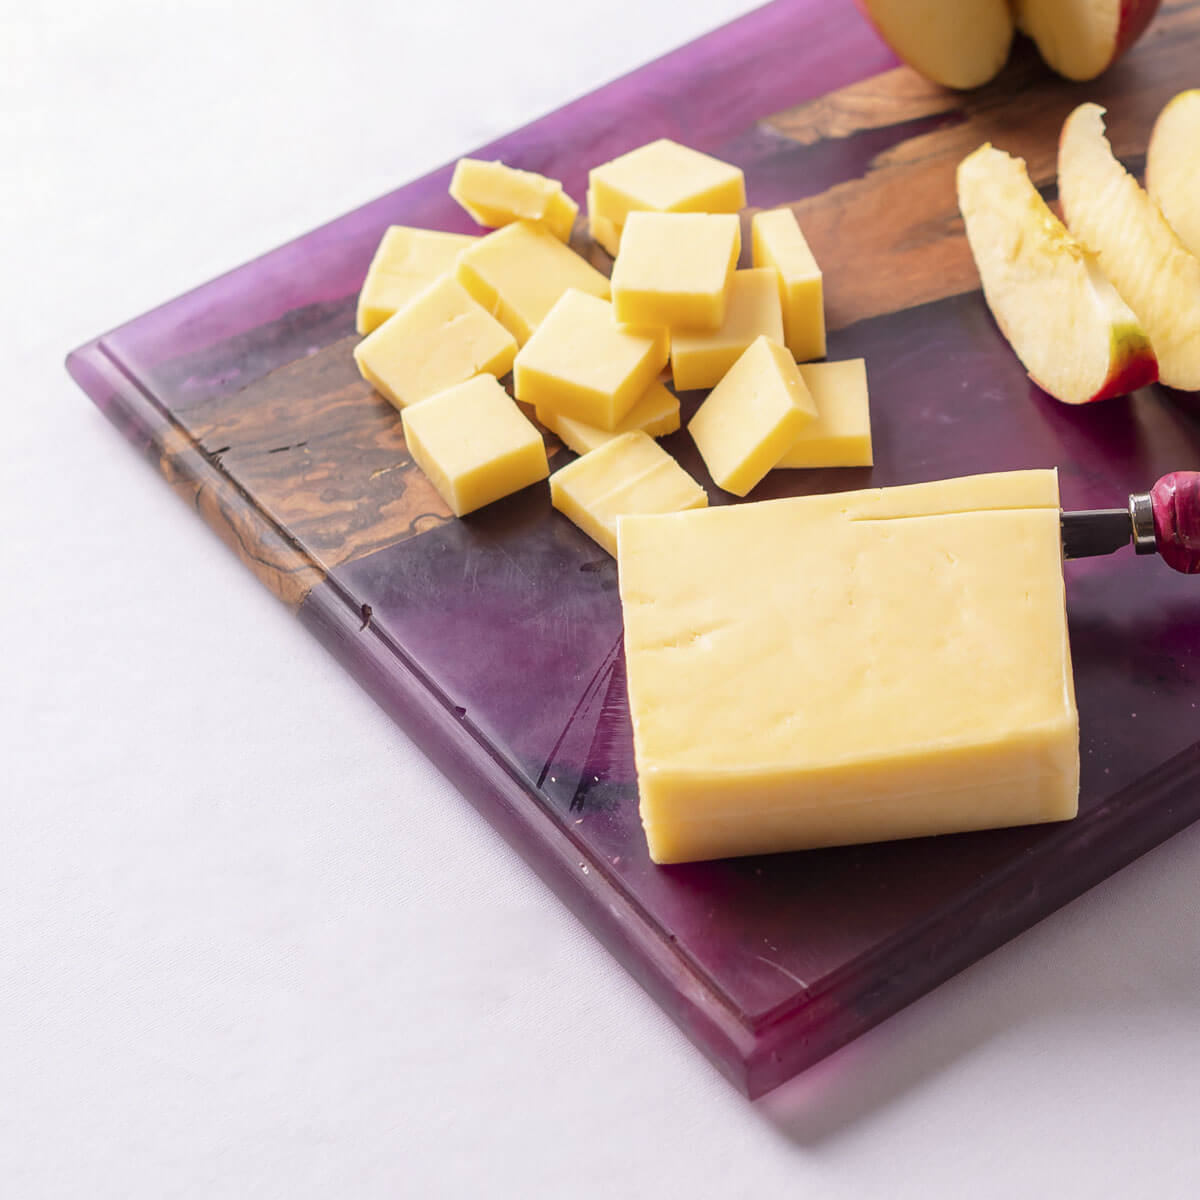 Cheese and apples on a purple resin charcuterie board